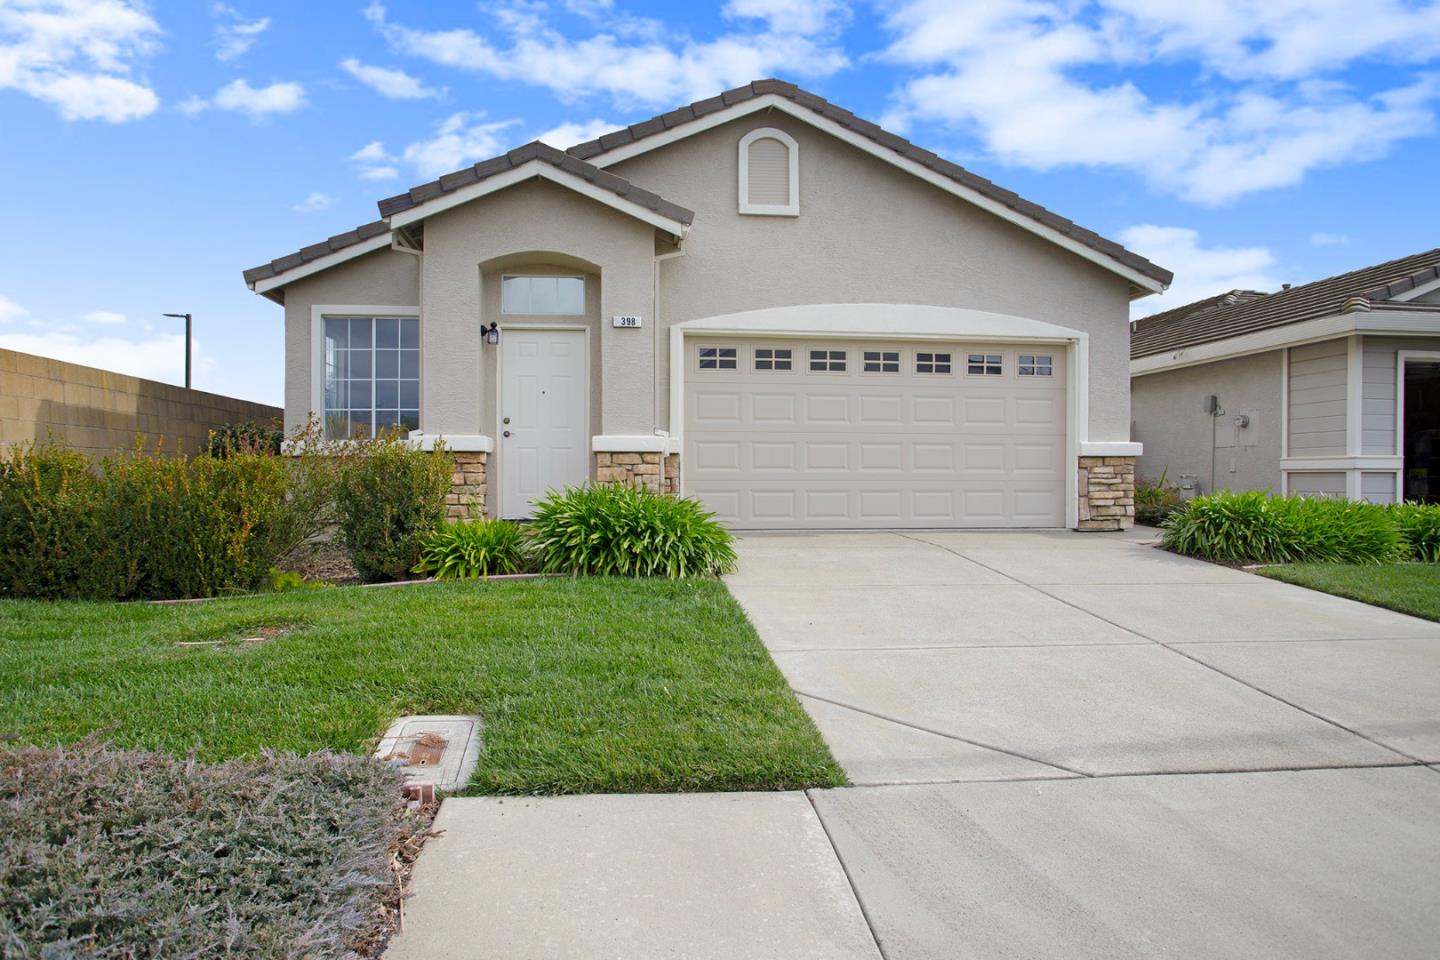 Photo of 398 Bartlett Ln in Vacaville, CA